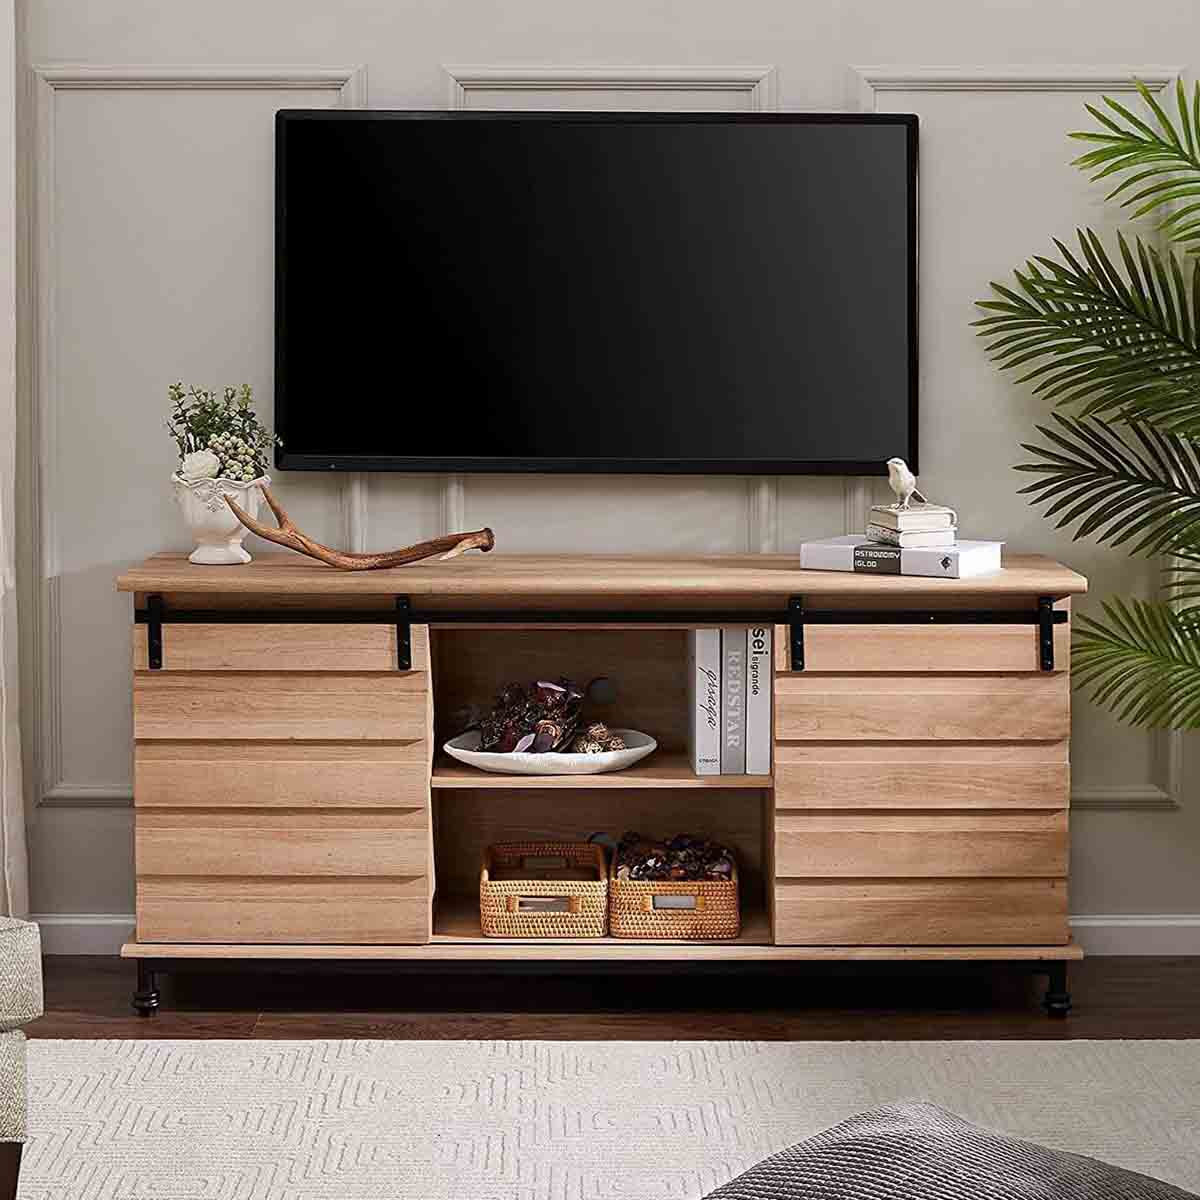 WAMPAT 58” Farmhouse TV Stands for TVs up to 70 inches, Light Brown